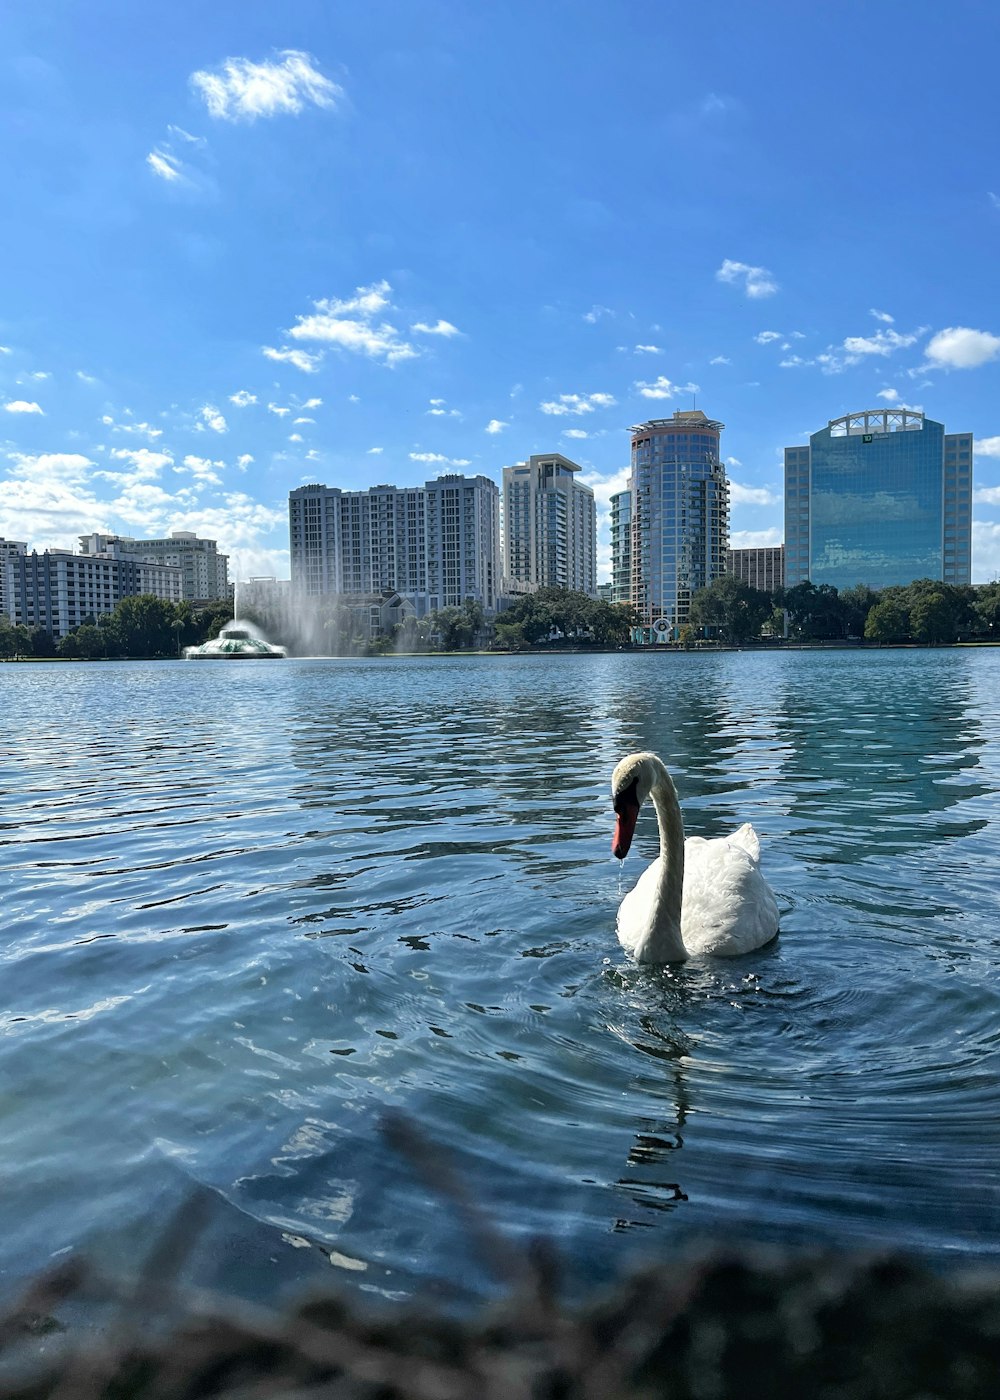 a swan is swimming in a lake in front of a city